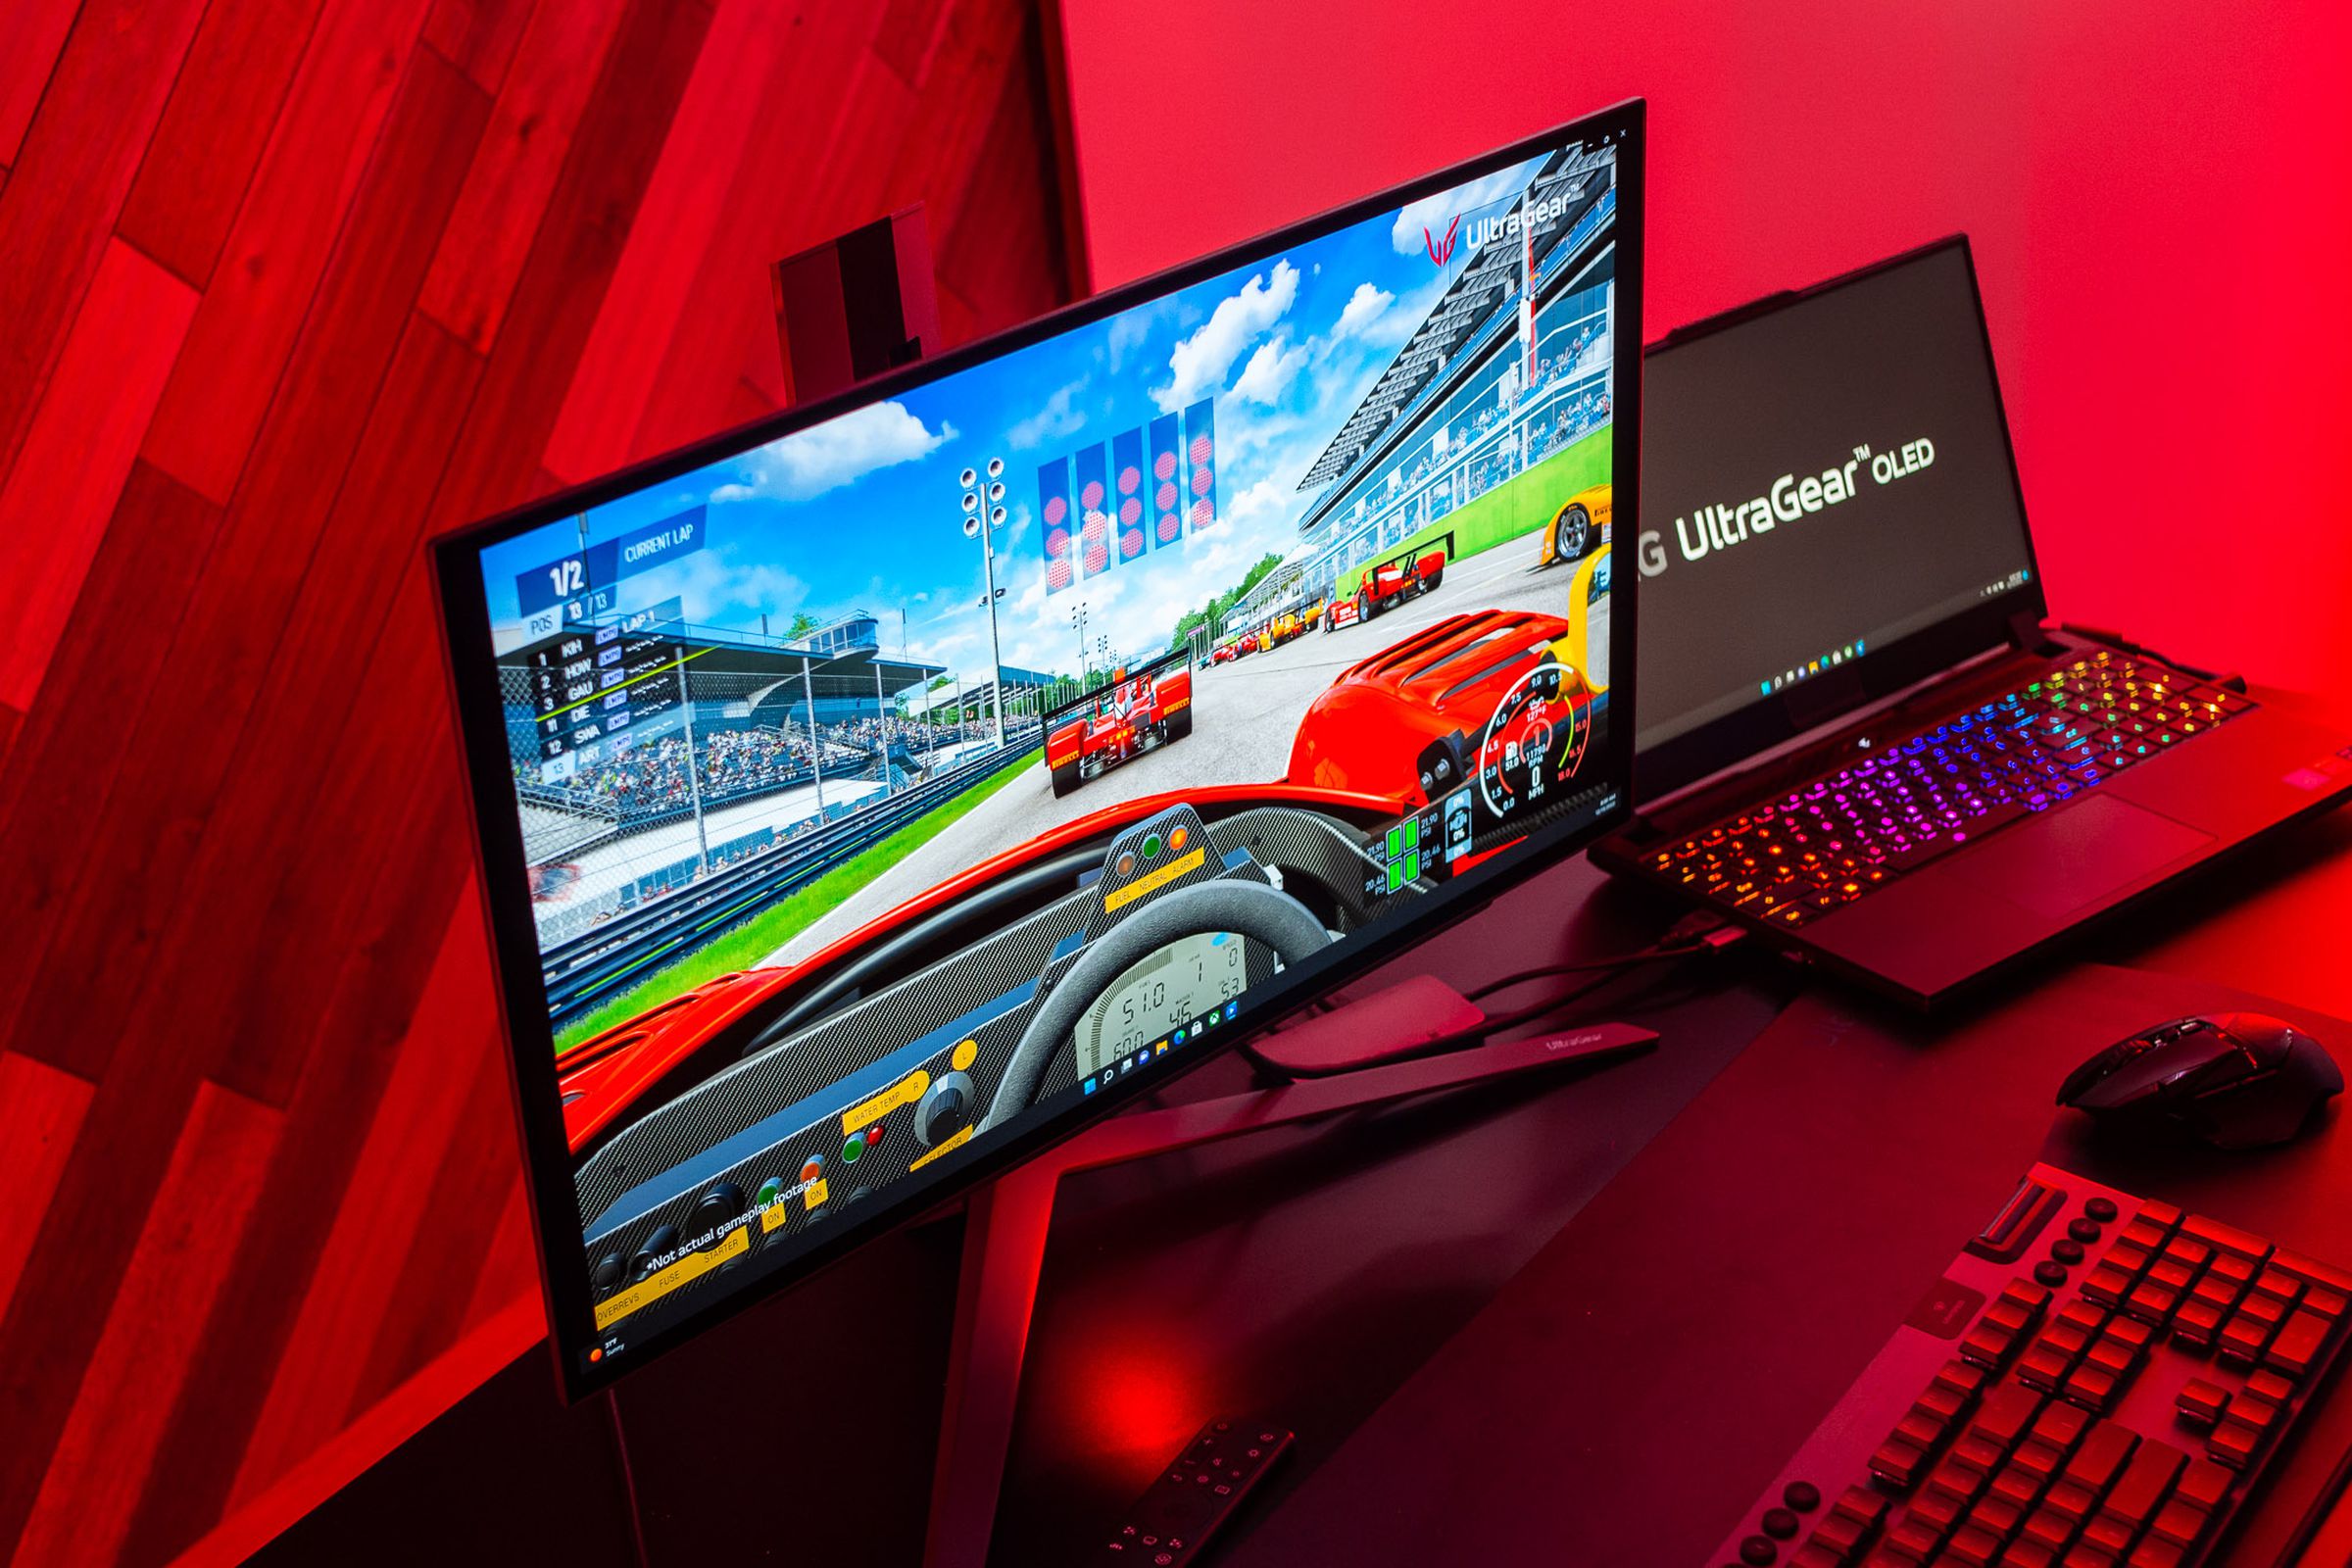 LG’s 27-inch UltraGear OLED gaming monitor showing off a video demo of a racing game.